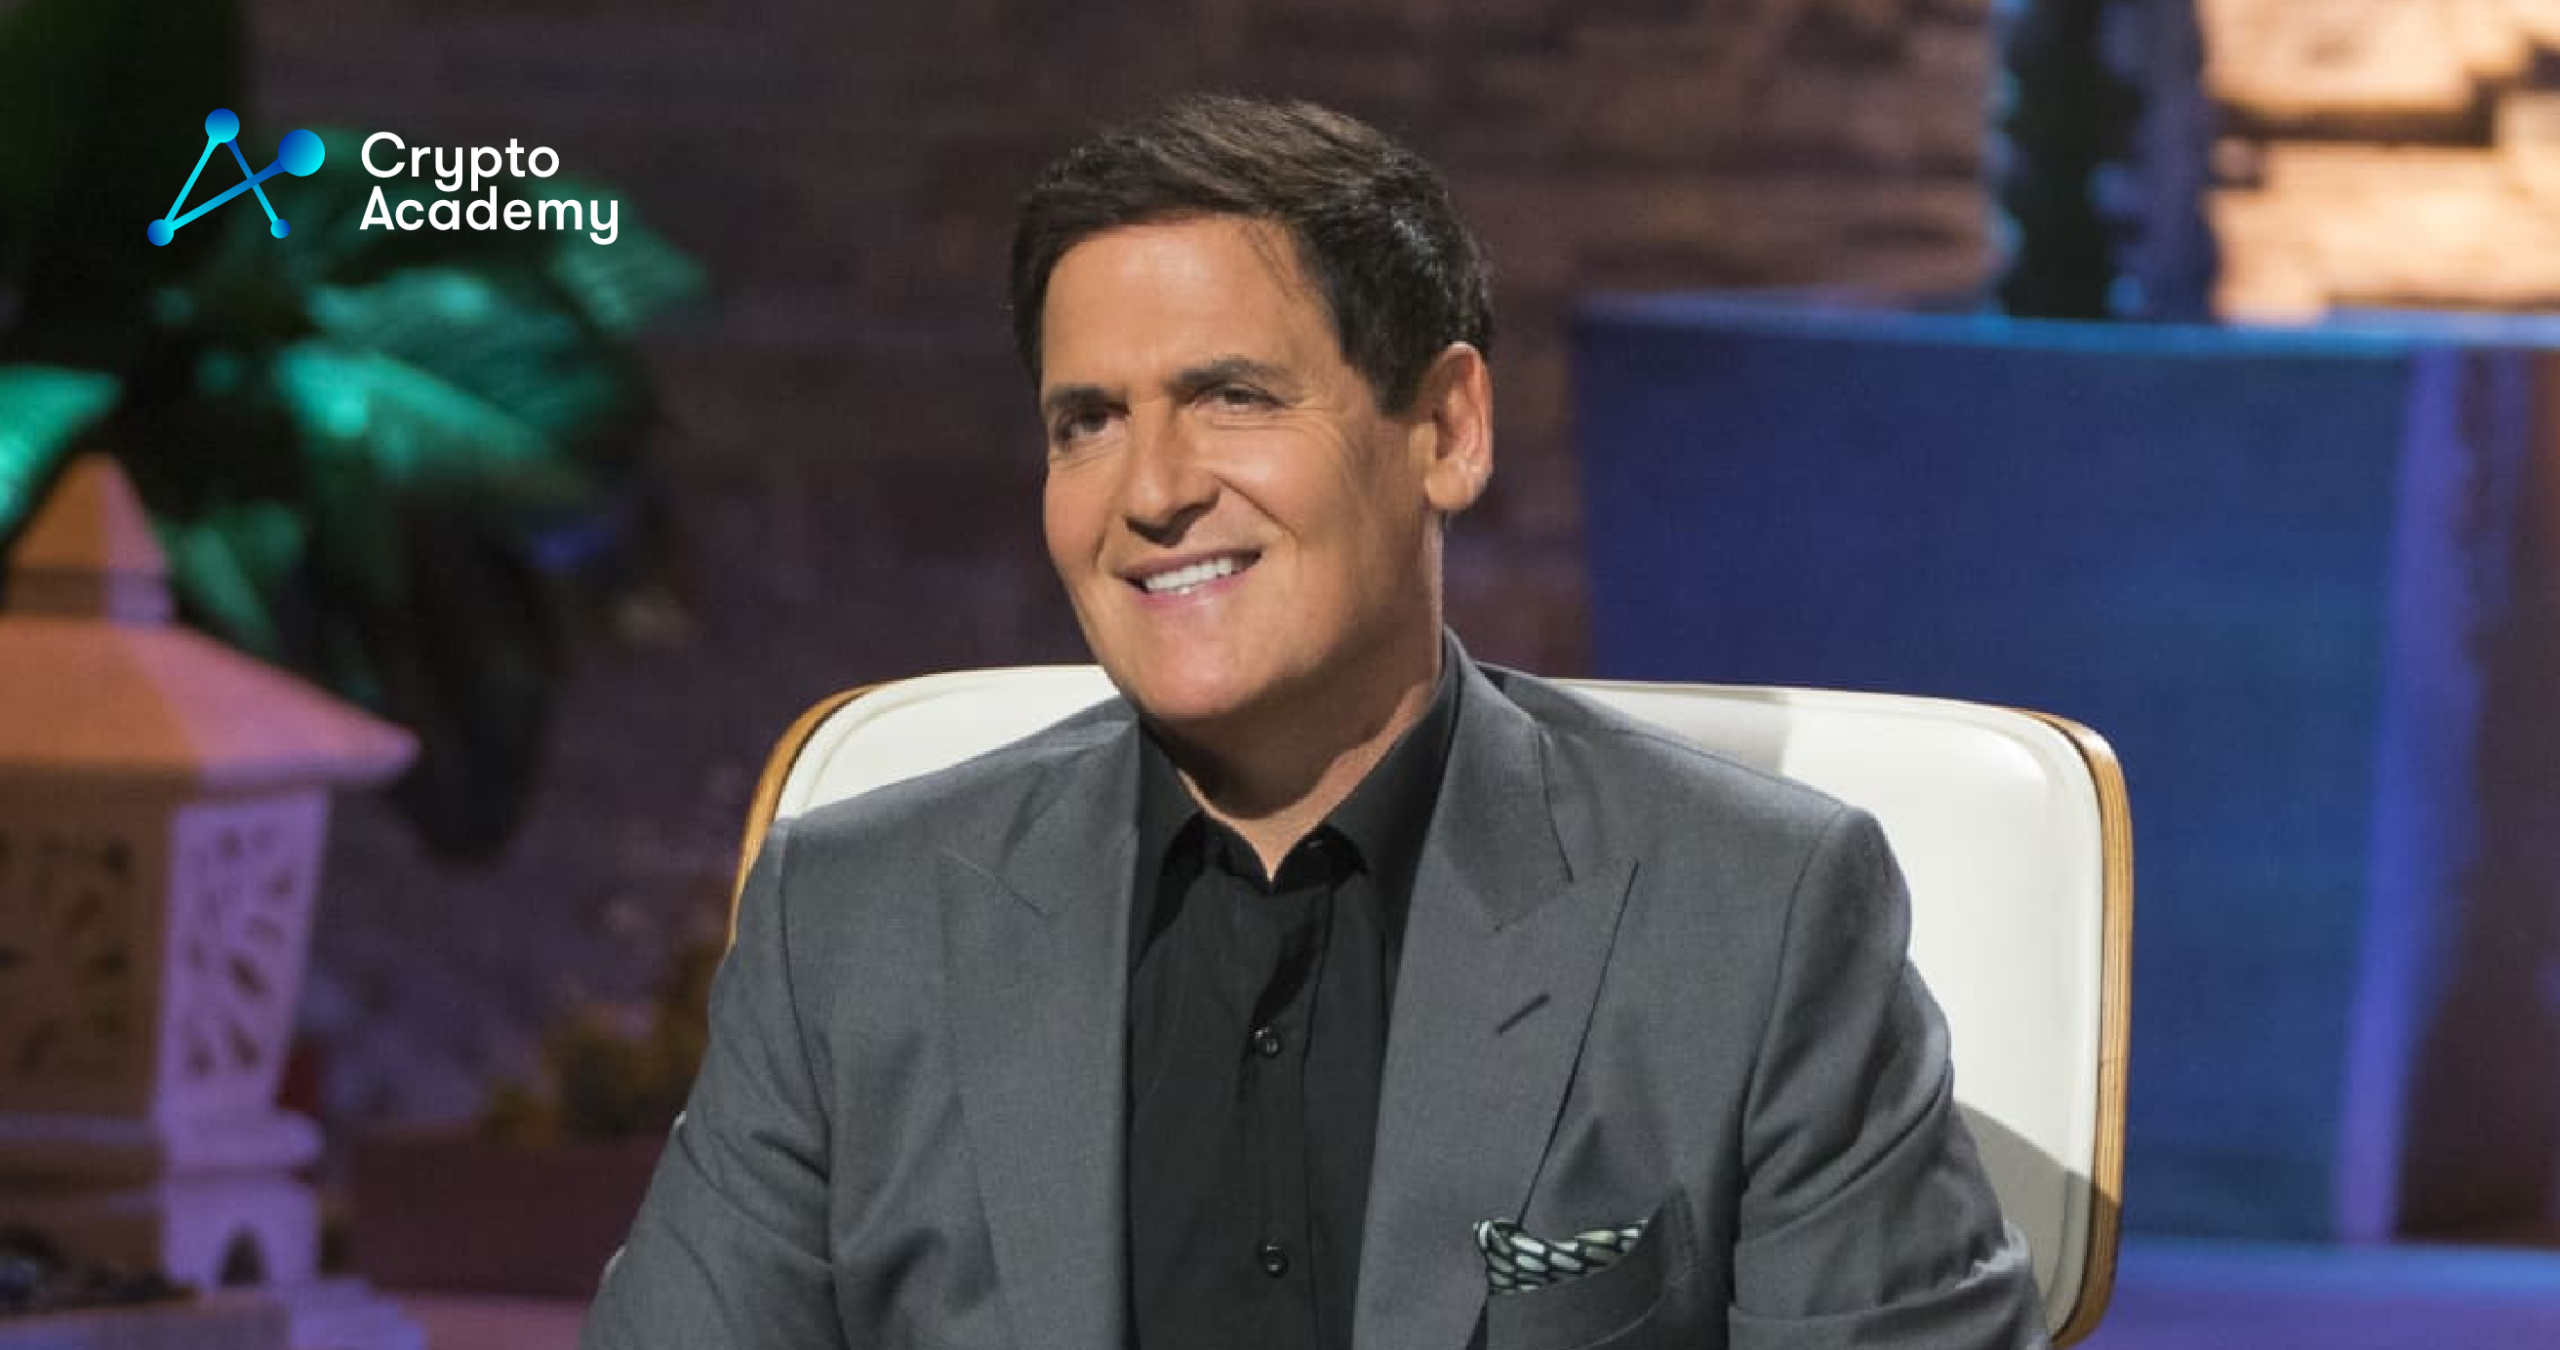 Mark Cuban sees commercial smart contract implementation as the next stimulus for the crypto and blockchain industries.